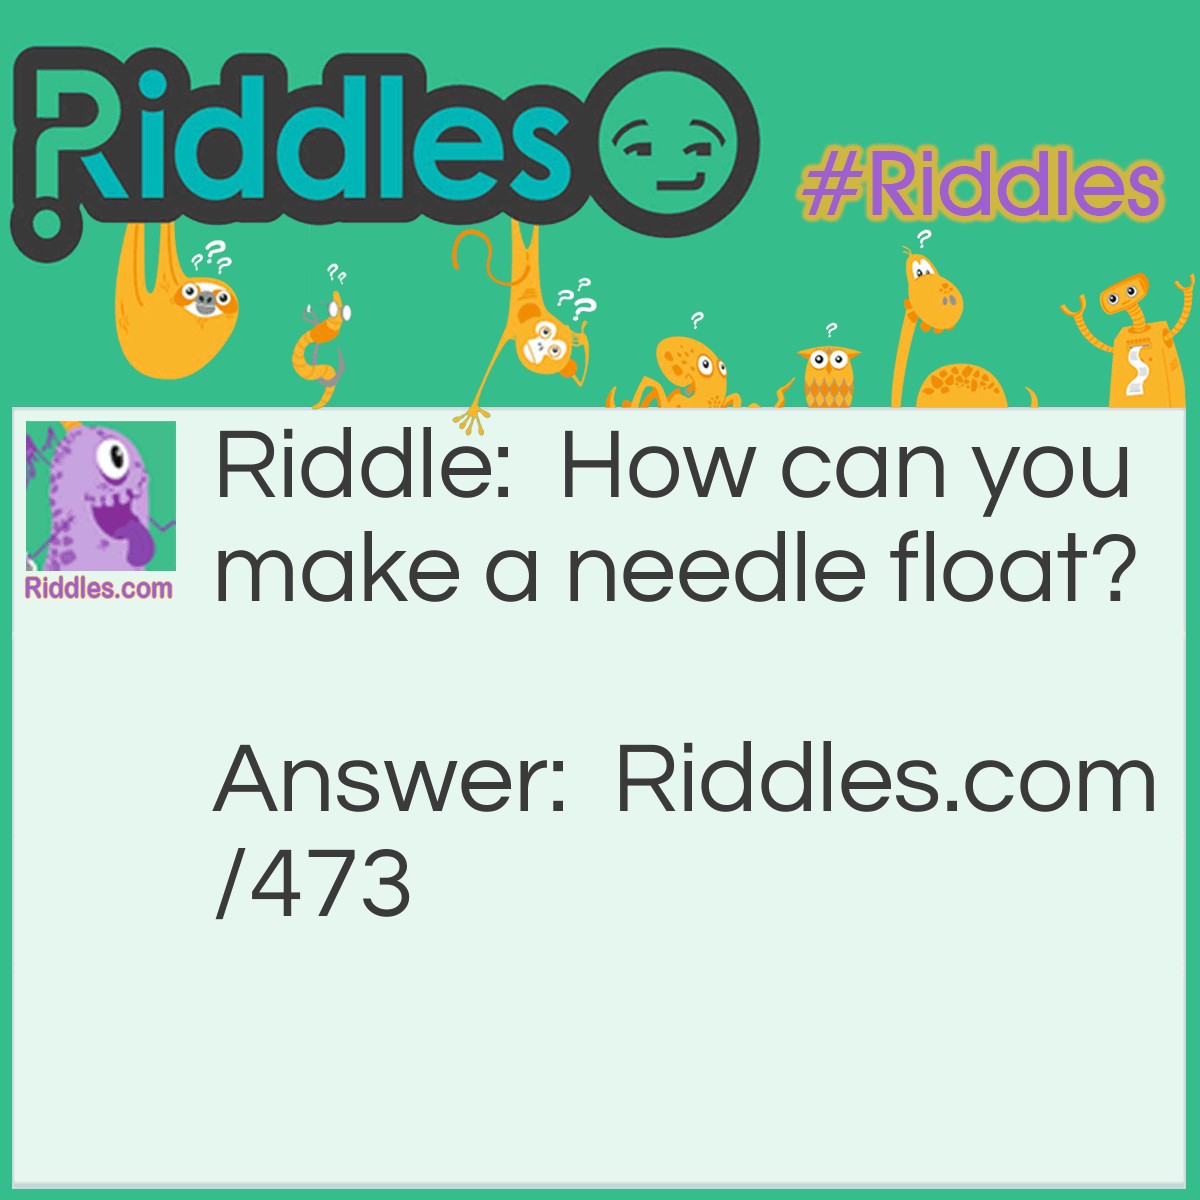 Riddle: How can you make a needle float? Answer: Take a thin piece of tissue paper and place the tissue paper under the needle before putting the needle in the water. The tissue paper will eventually sink and the needle will remain floating.